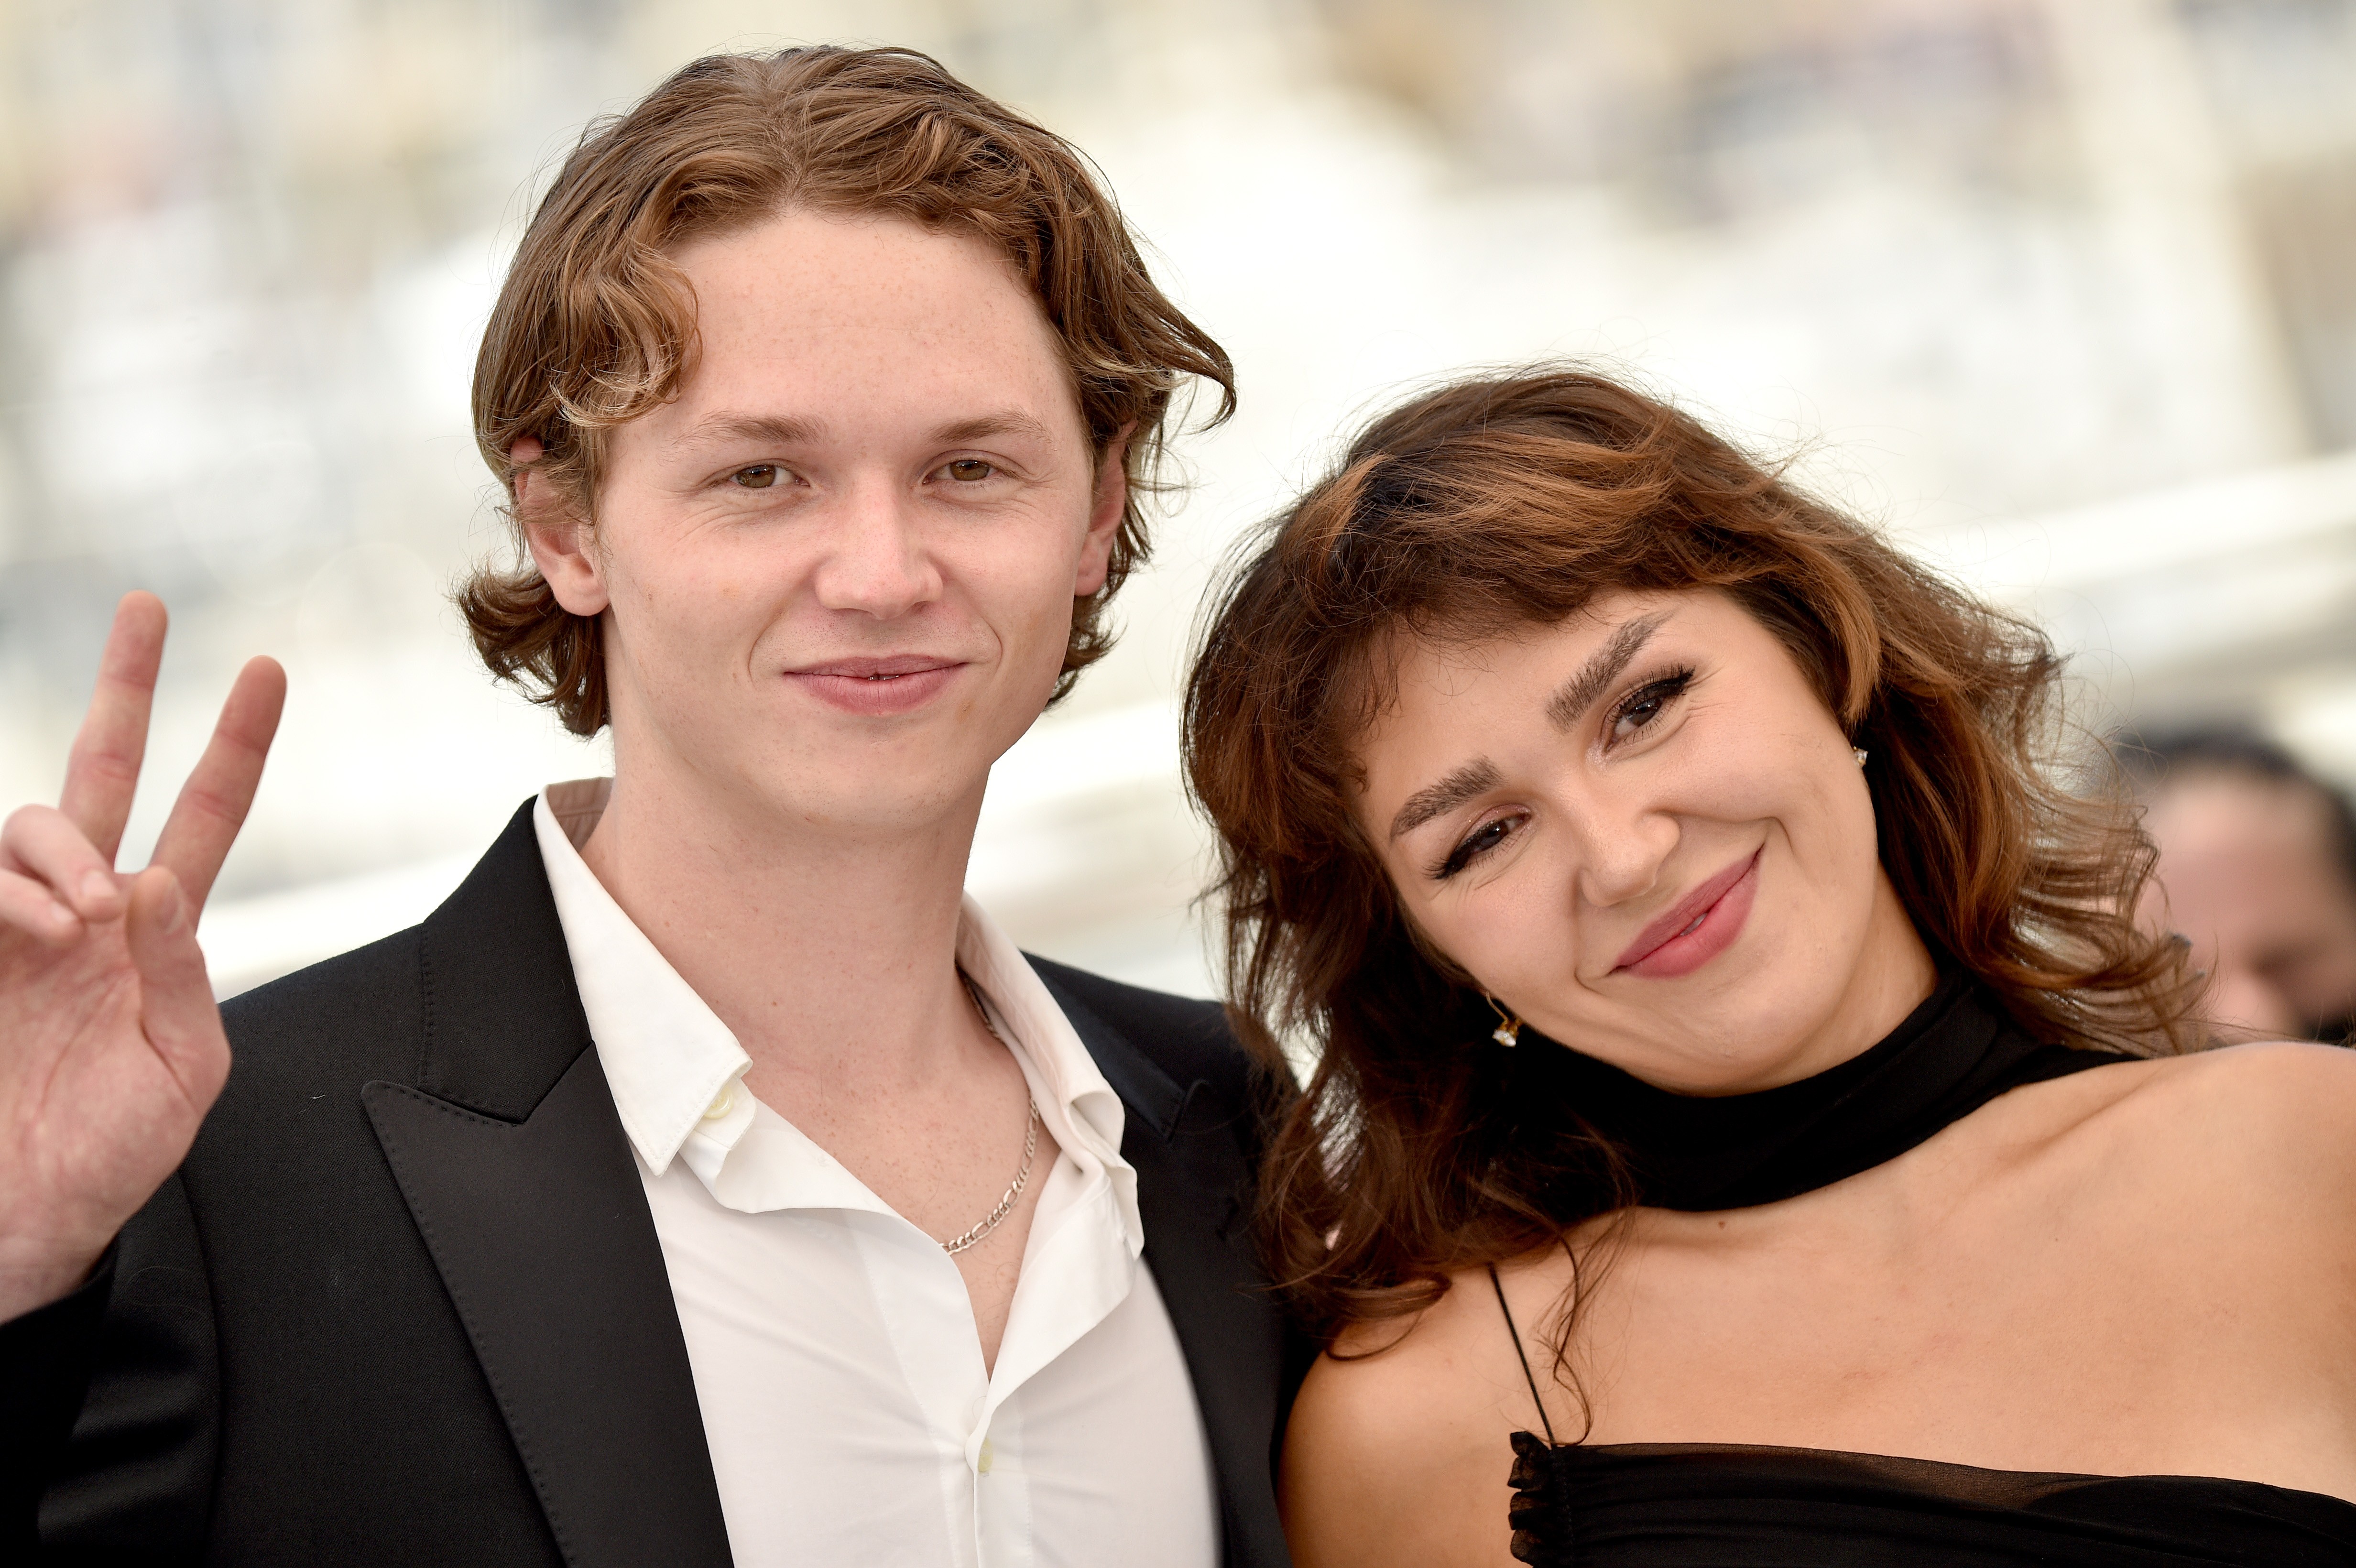 CANNES, FRANCE - JULY 07: Mercedes Kilmer and Jack Kilmer attend "Val" photocall during the 74th annual Cannes Film Festival on July 07, 2021 in Cannes, France. (Photo by Lionel Hahn/Getty Images) (Foto: Getty Images)